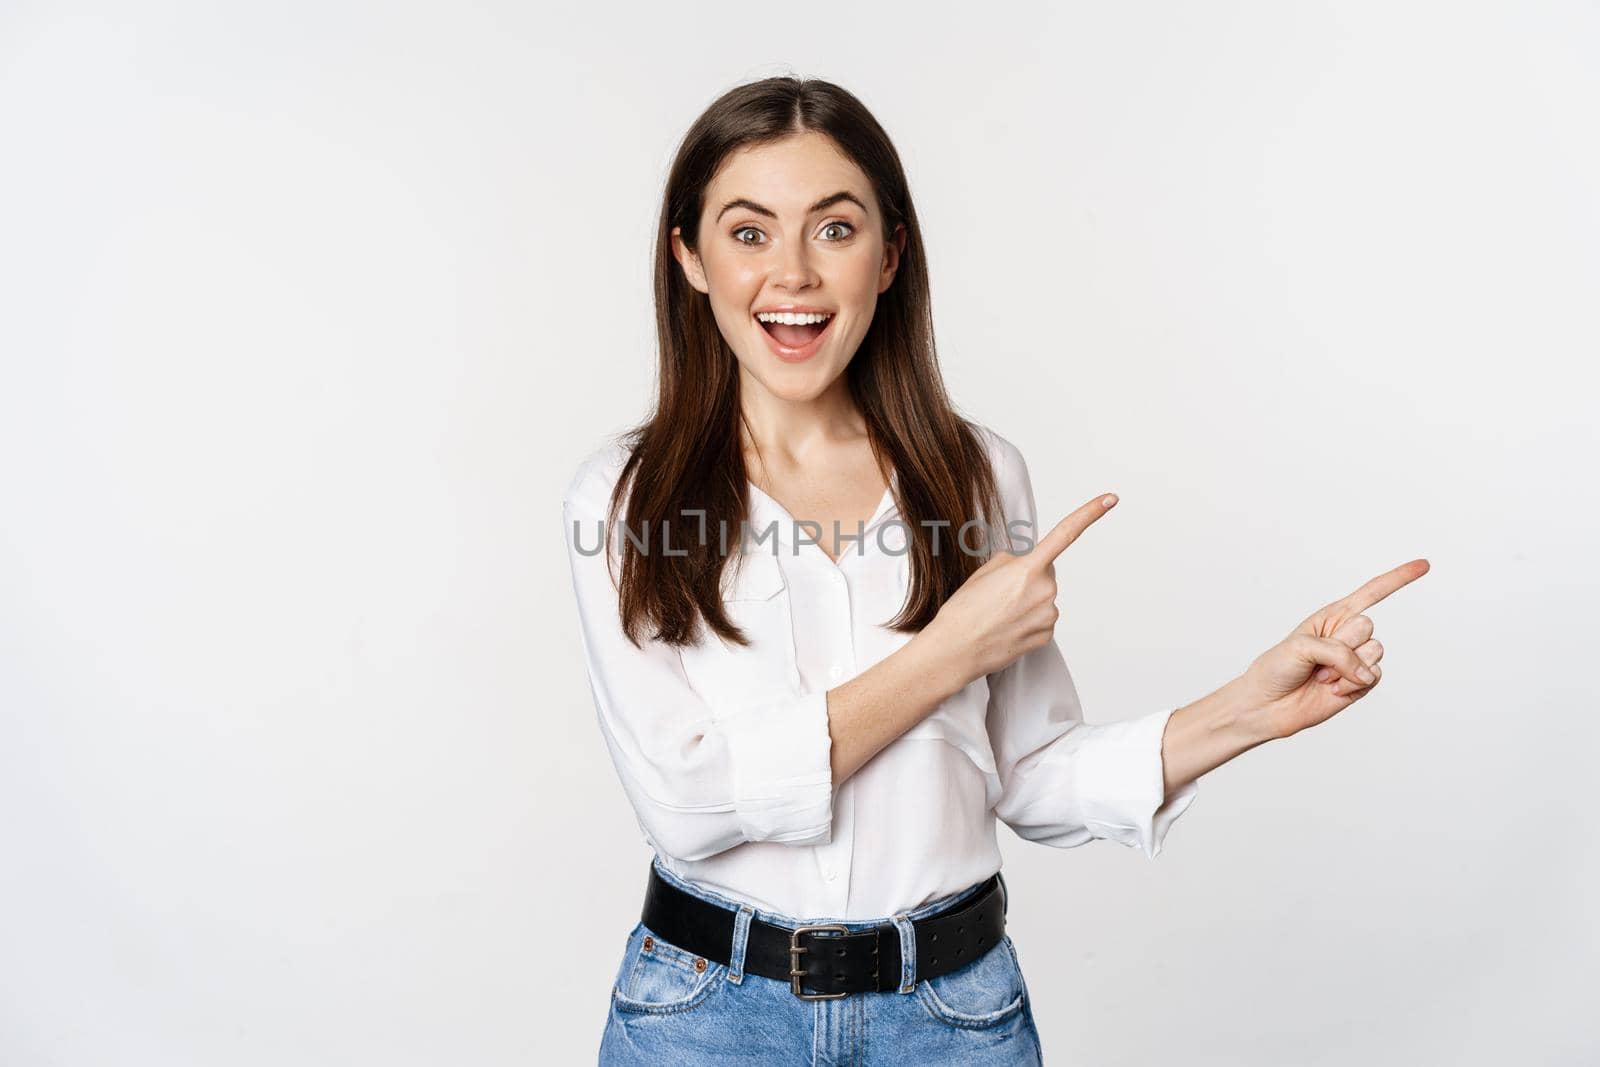 Portrait of smiling confident woman, business girl showing advertisement, pointing fingers right at logo, banner or announcement, standing over white background.